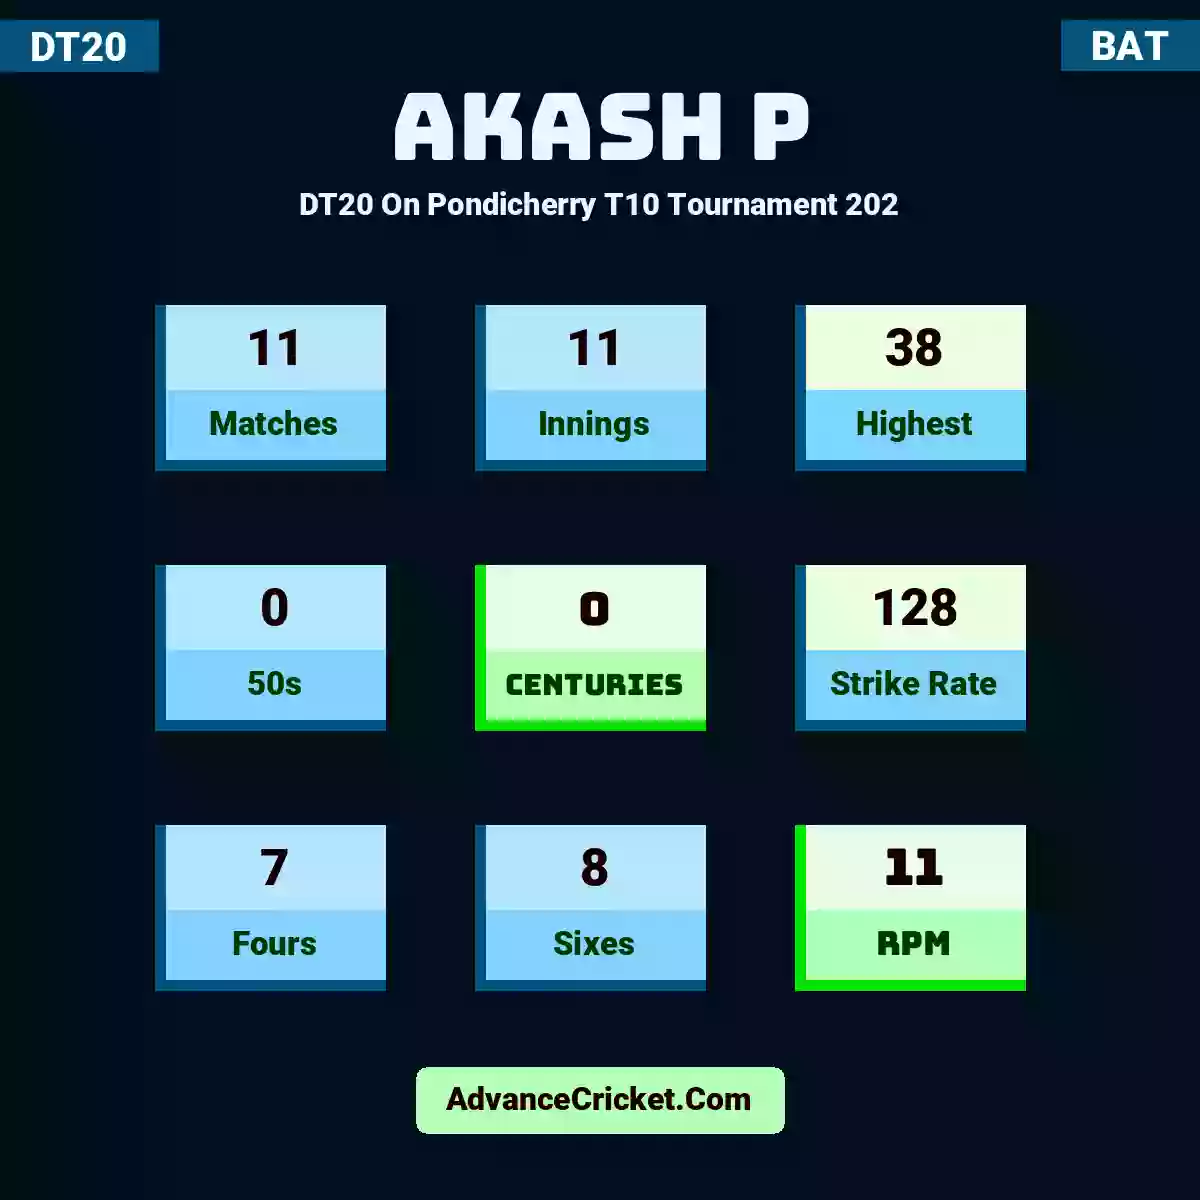 Akash P DT20  On Pondicherry T10 Tournament 202, Akash P played 11 matches, scored 38 runs as highest, 0 half-centuries, and 0 centuries, with a strike rate of 128. A.P hit 7 fours and 8 sixes, with an RPM of 11.